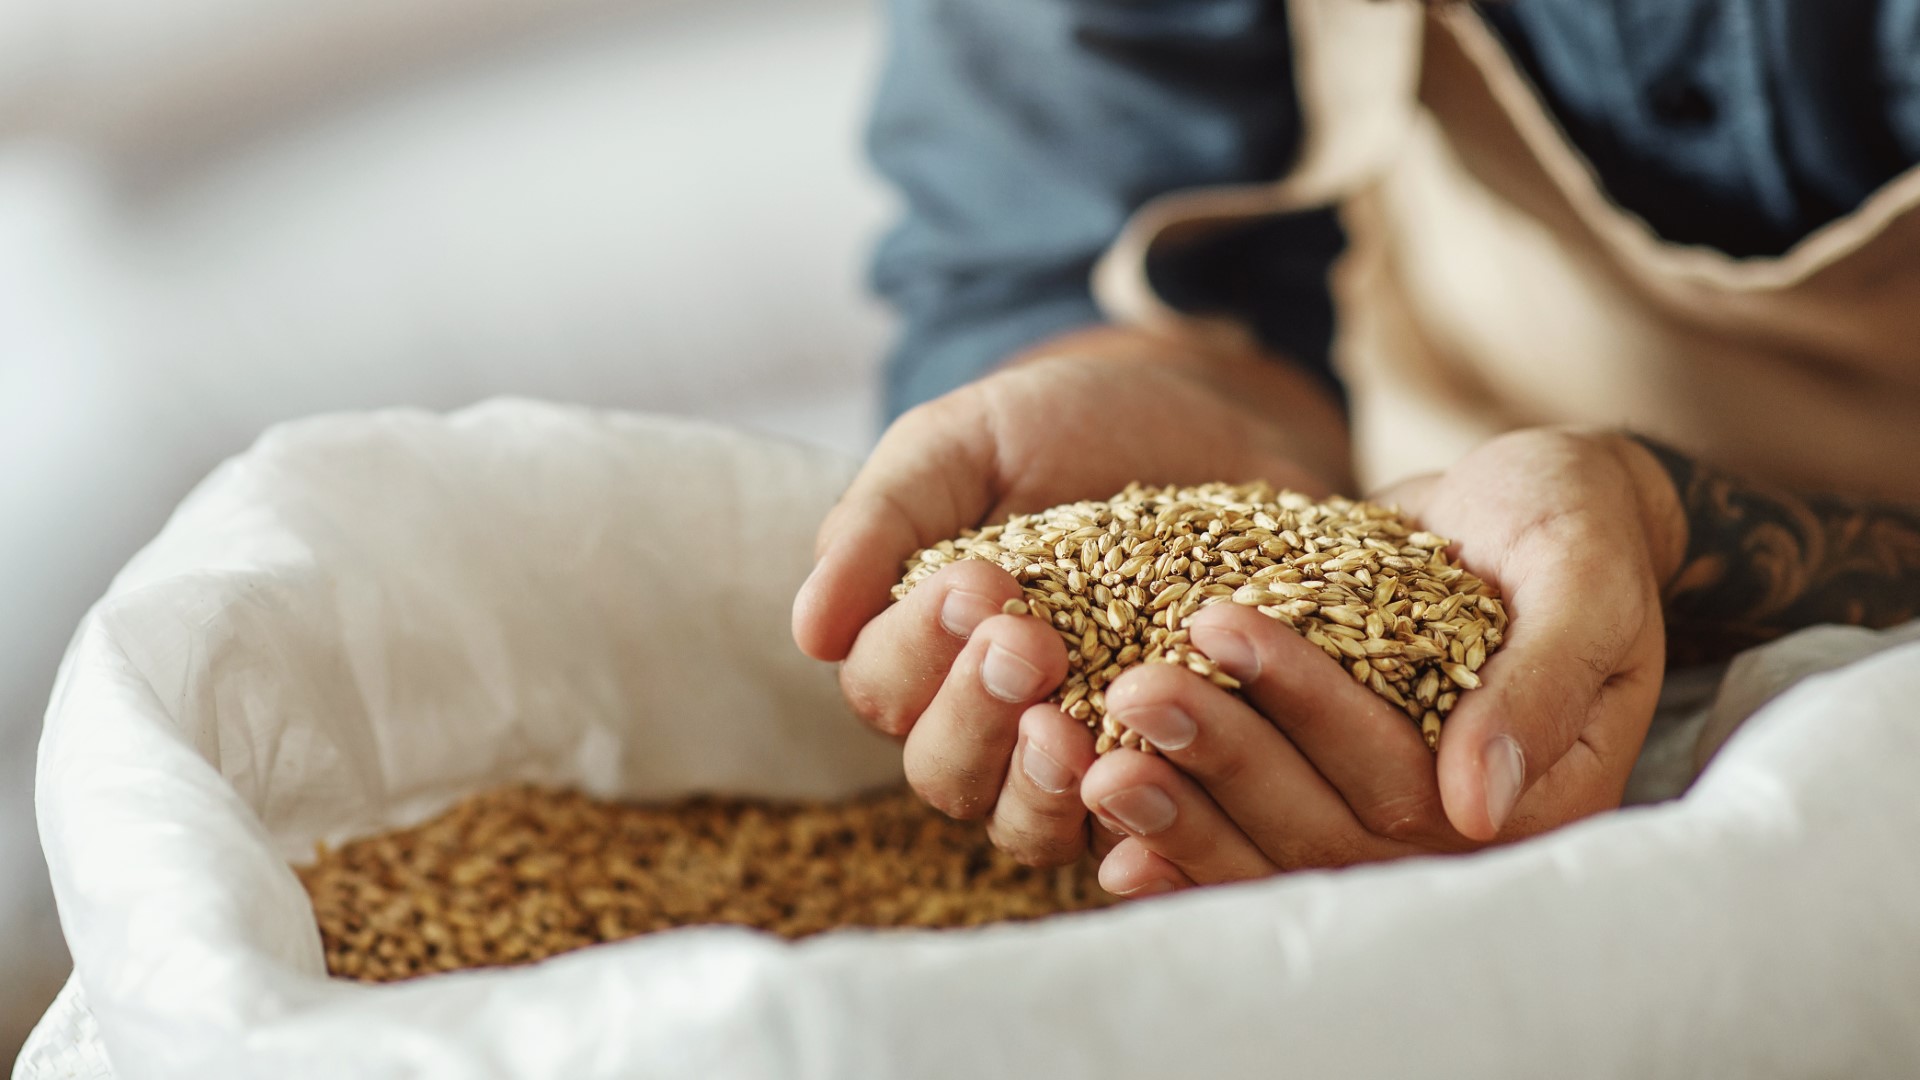 Hands holding grains out of a sack.